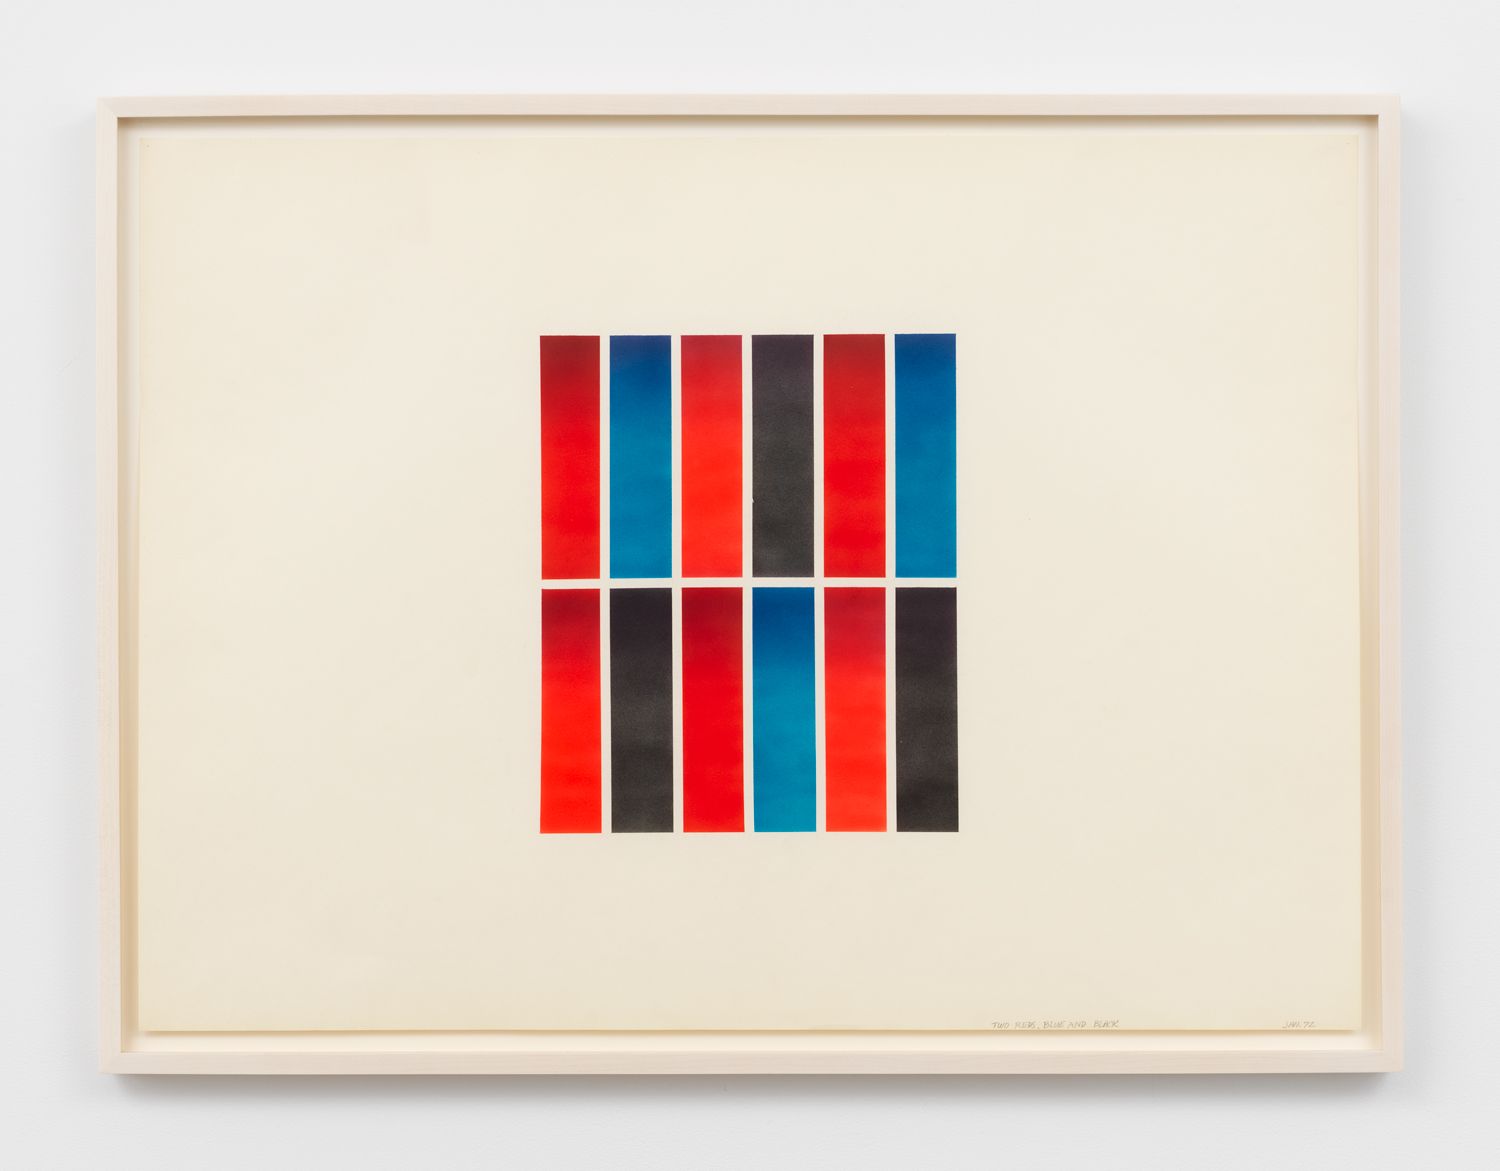 Don Dudley, Two Reds, Blue and Black, 1972, airbrush ink on paper, 23h x 29w in.